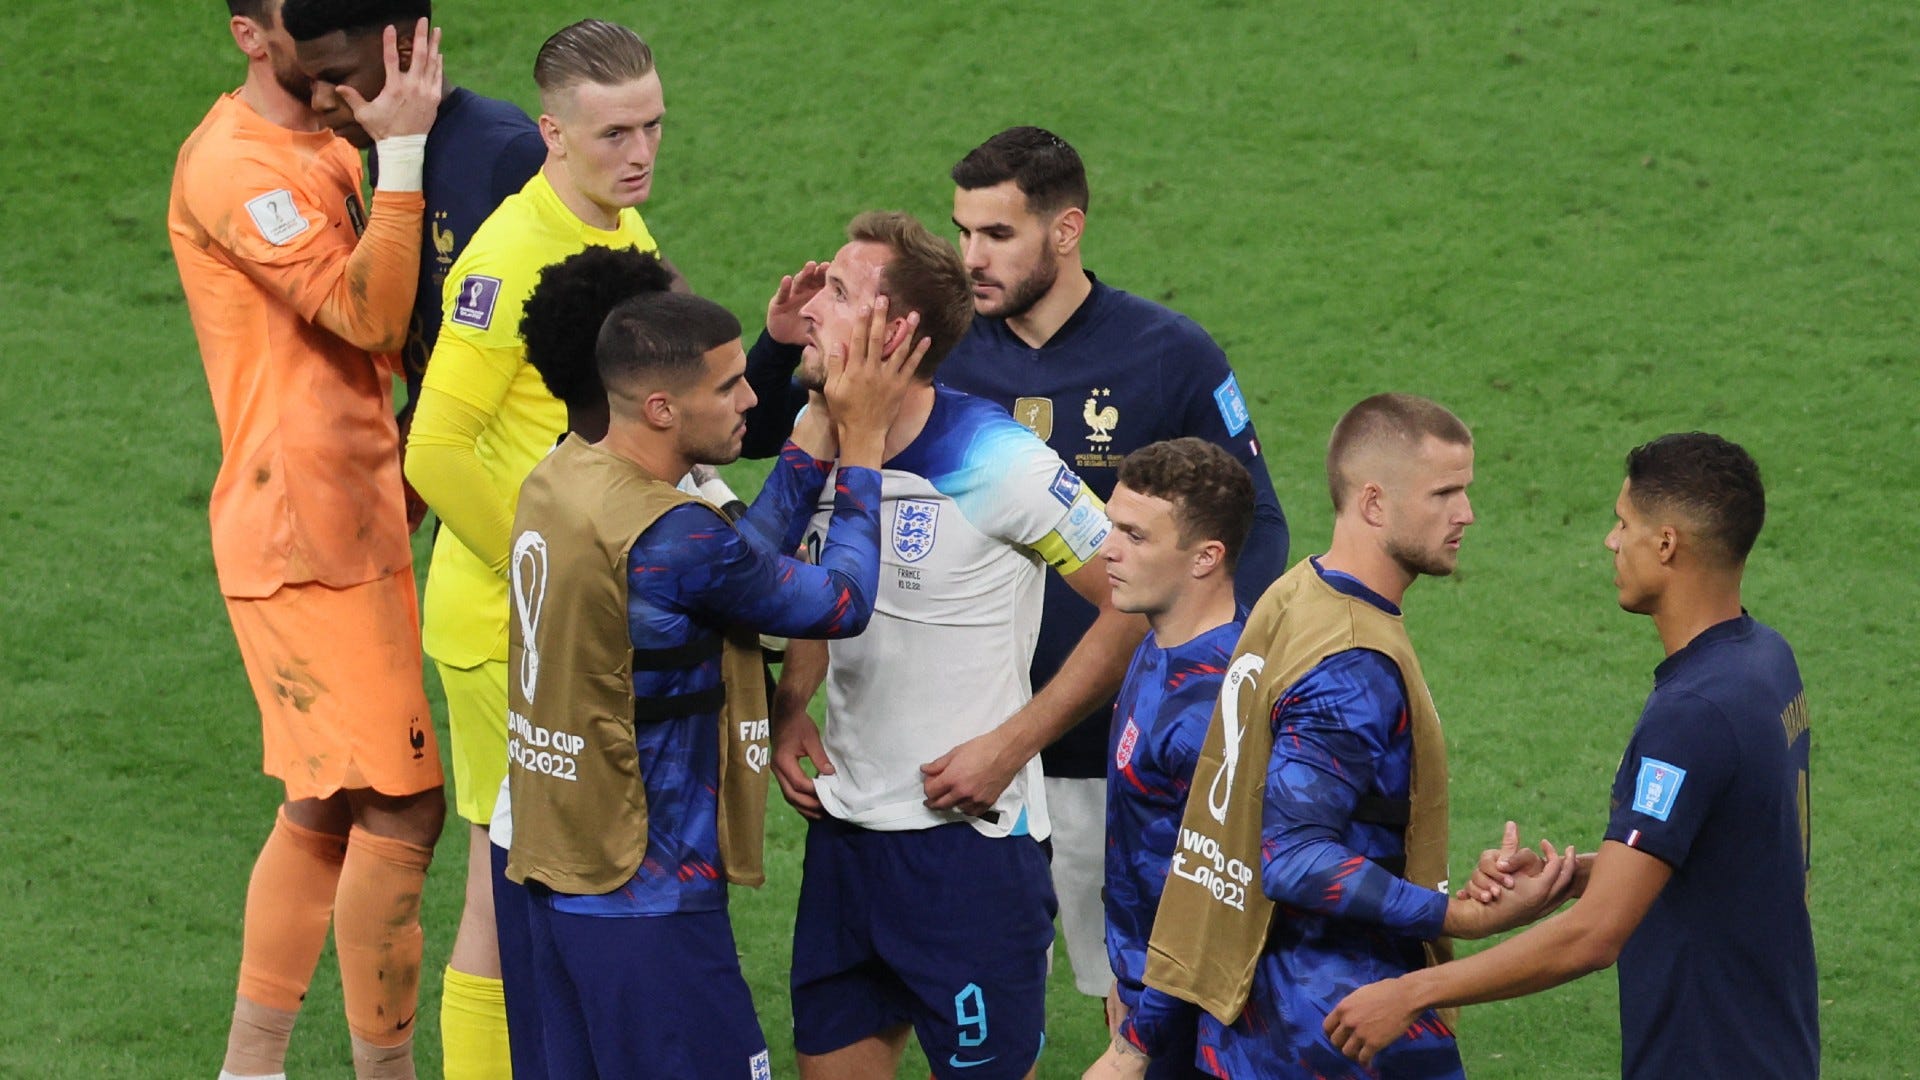 He'll be stronger for this' - Jordan Henderson backs Harry Kane to fight  back from penalty miss in England's World Cup loss to France | Goal.com UK